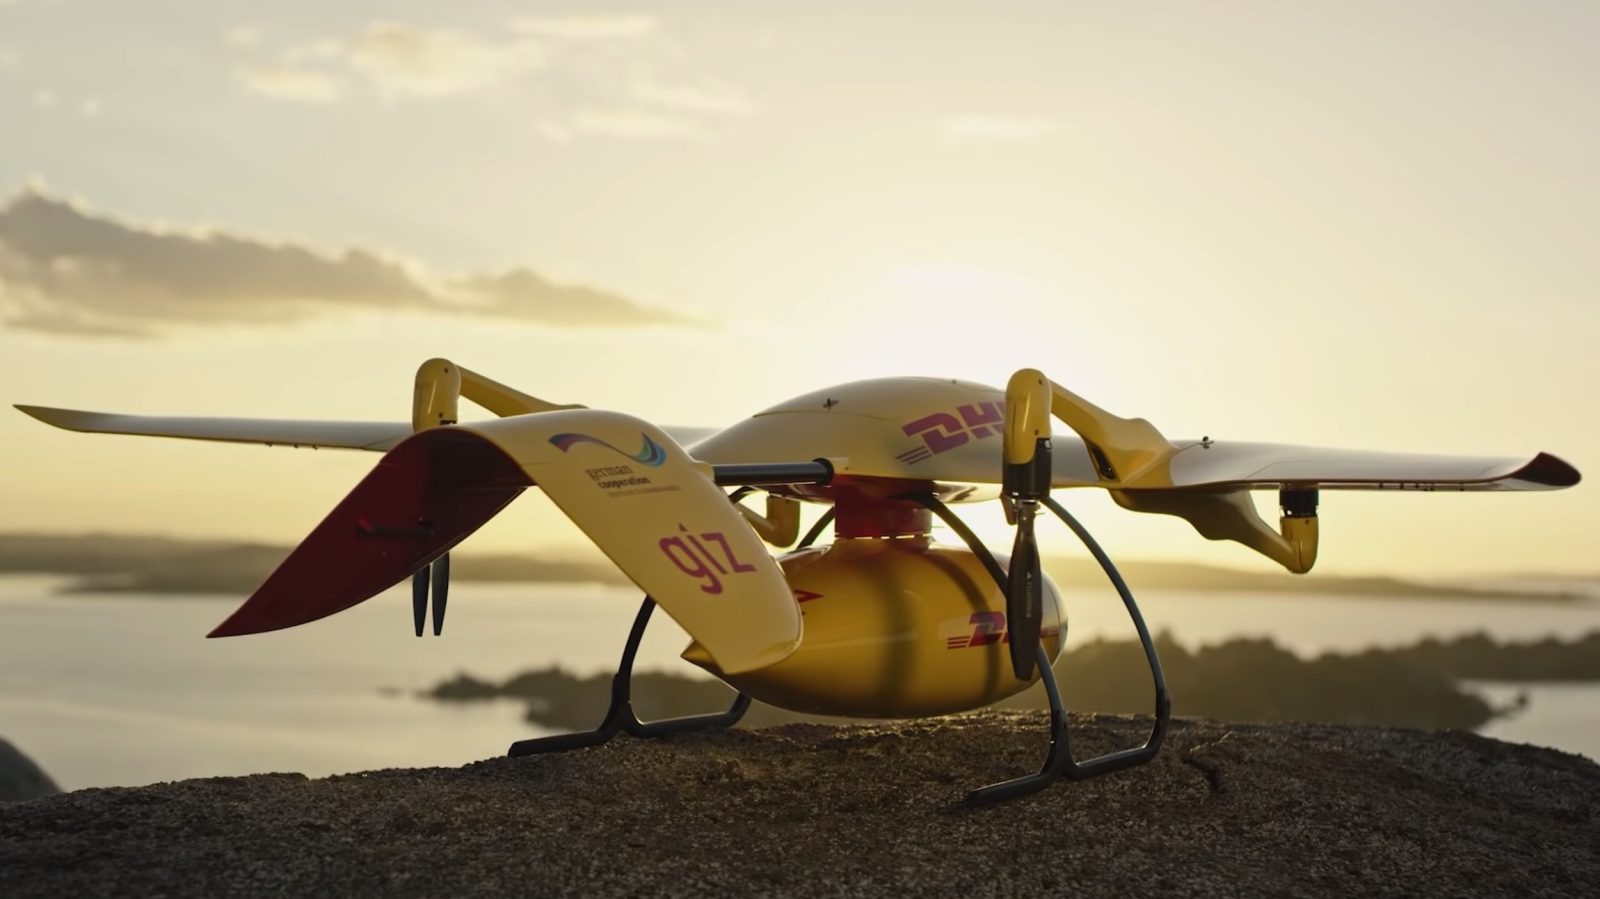 Deliver Future: DHL Parcelcopter flies 37 miles autonomously to a remote island in Lake Victoria